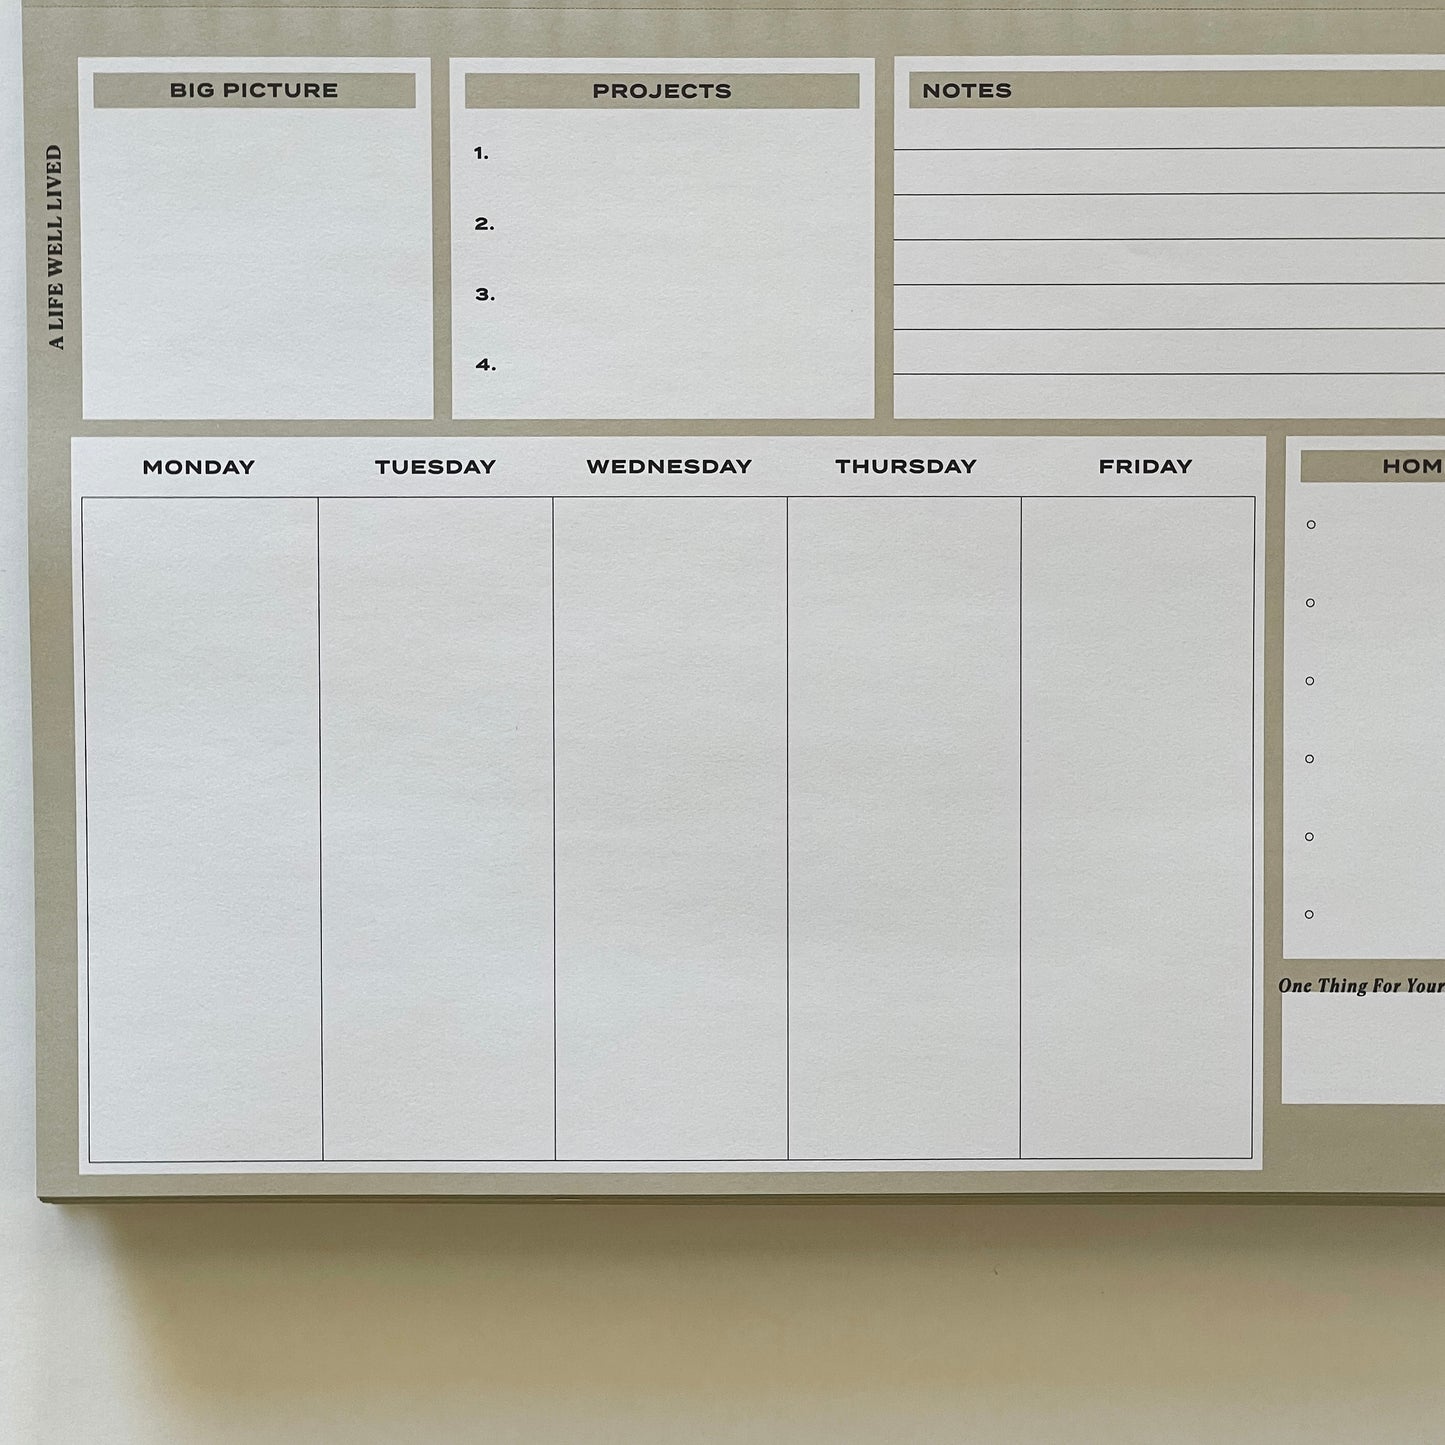 Stay on Track Desktop Notepad | Charcoal Linen